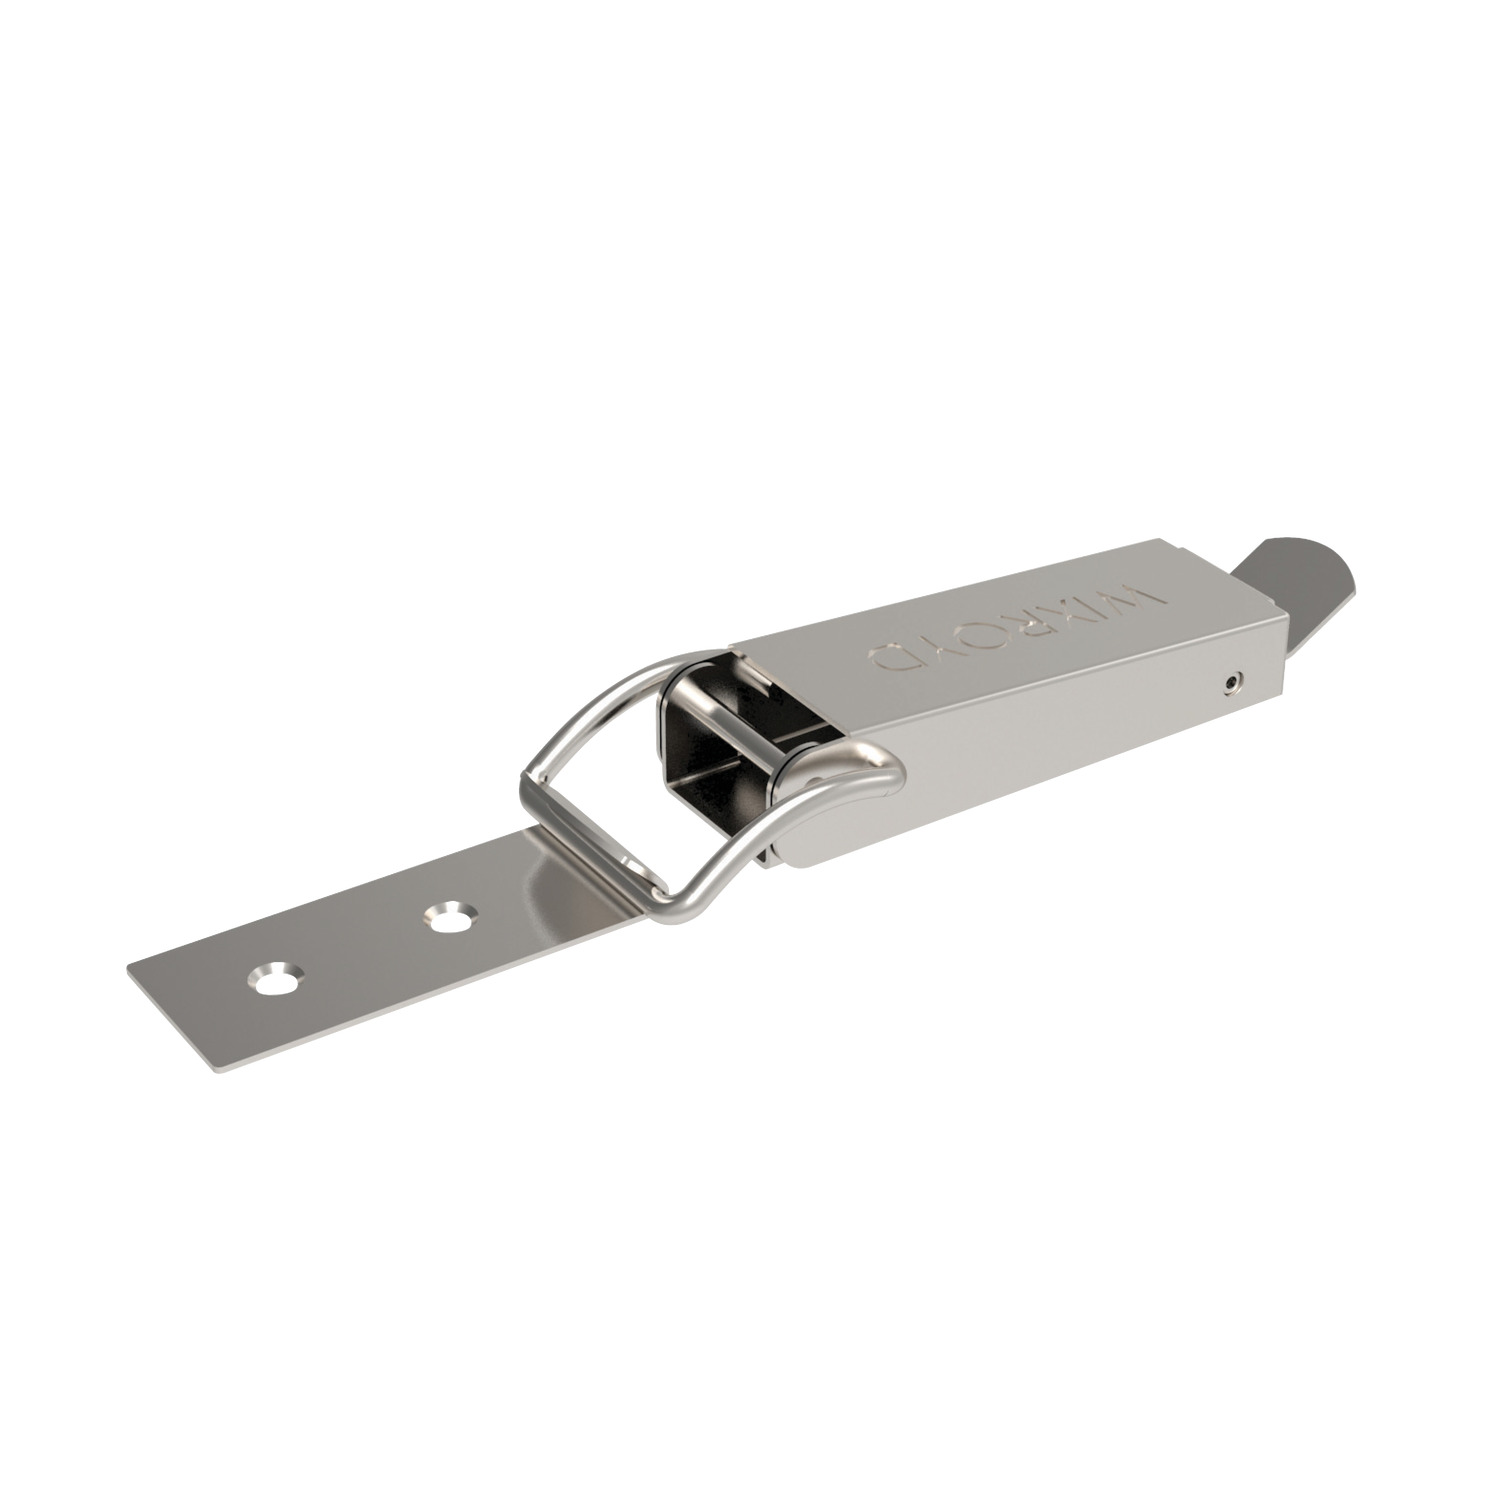 J0426.AC0004 Toggle Latches Zinc Plated Steel - 193,5 - 19 - 43